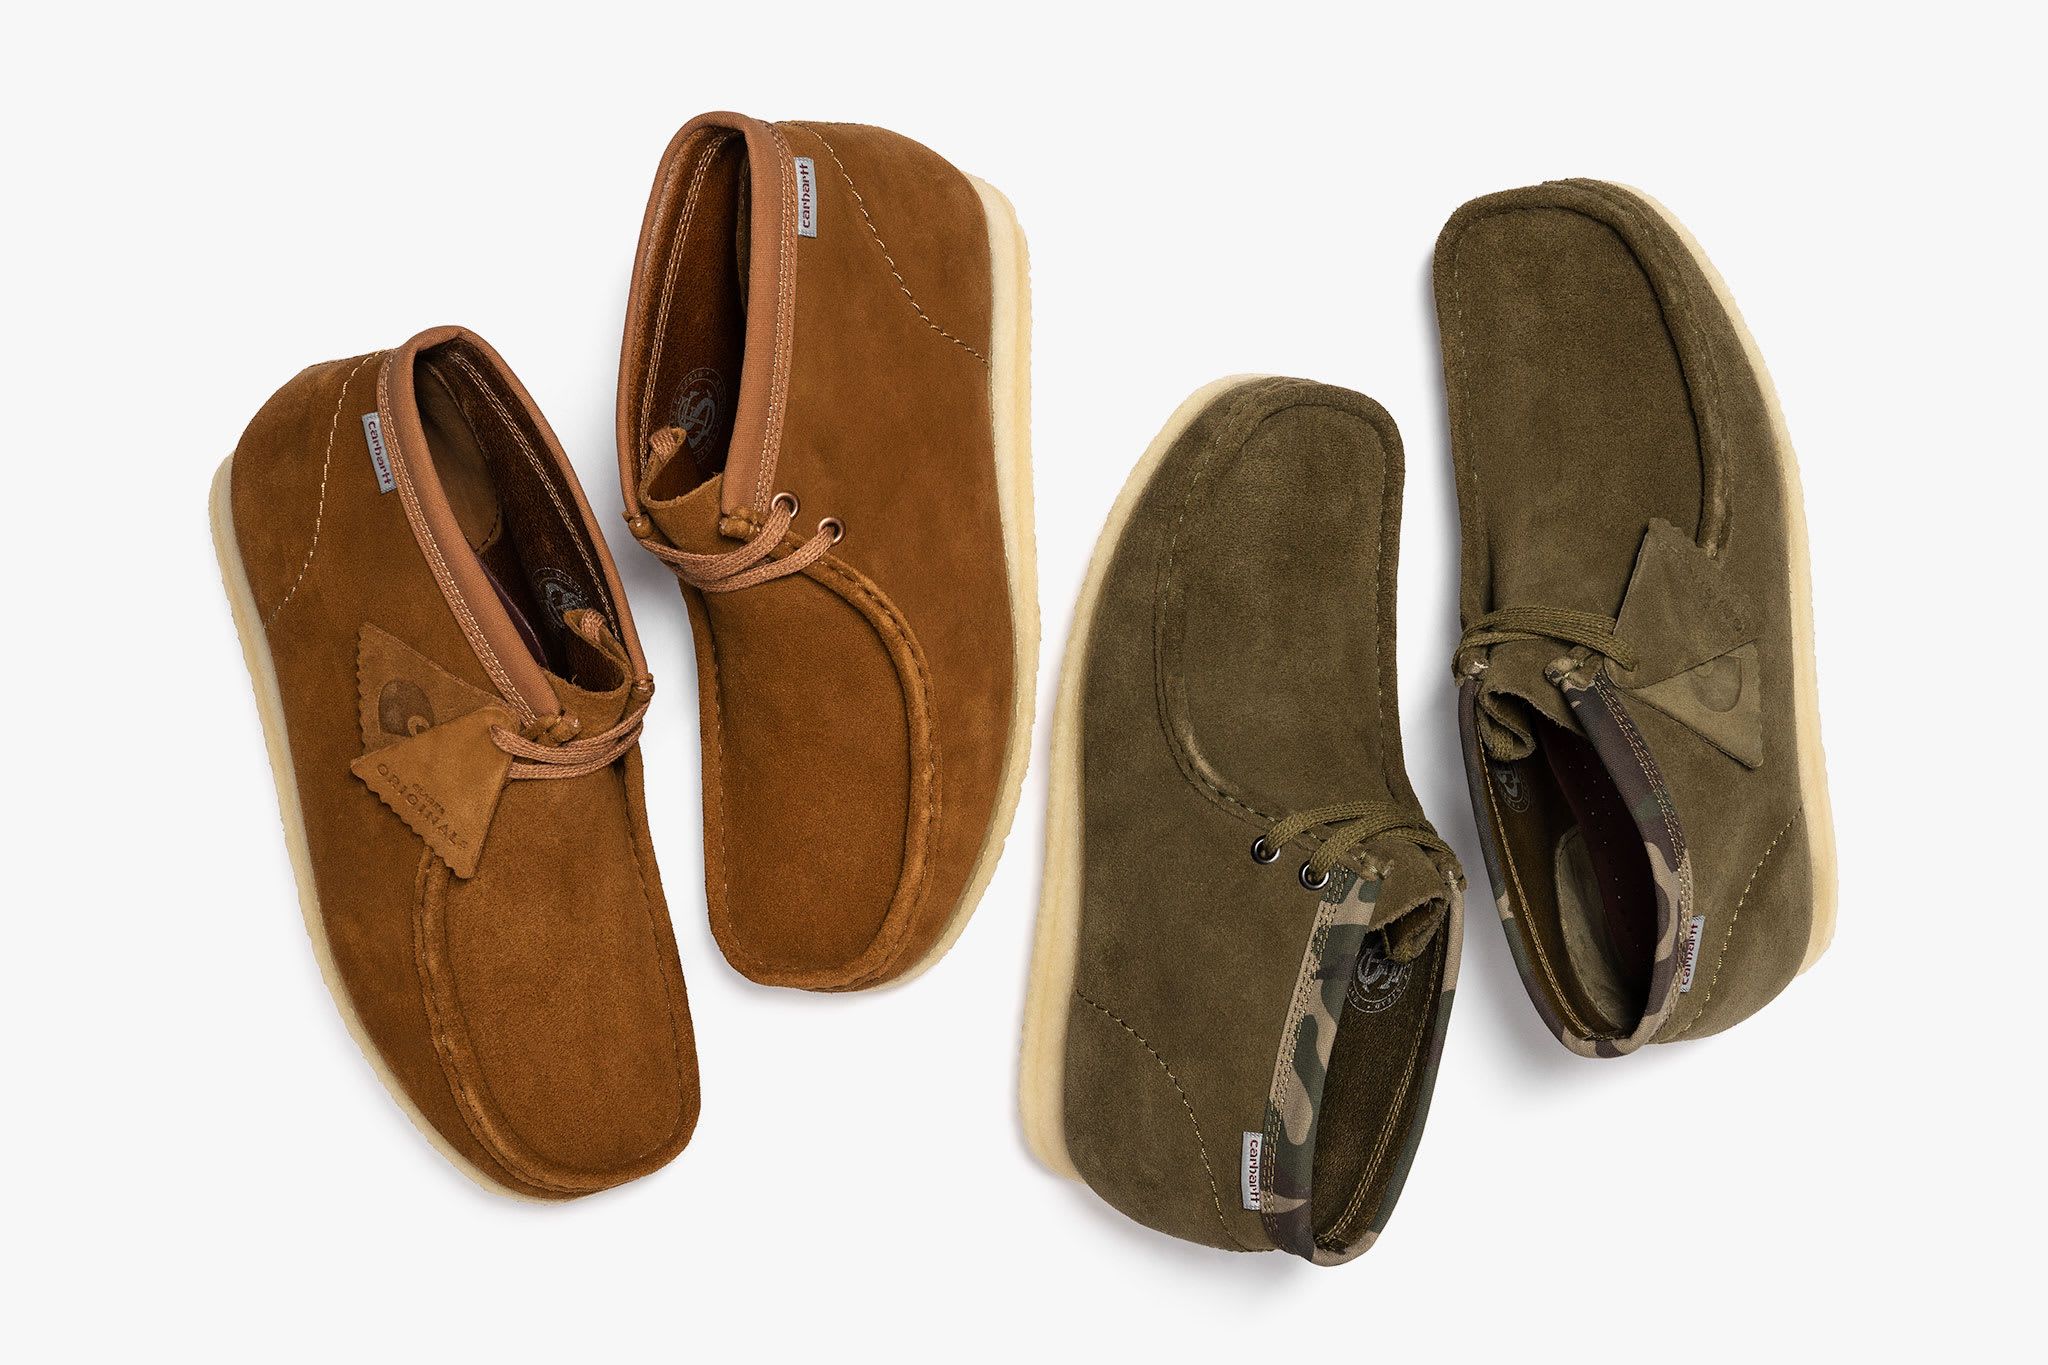 Clarks® Originals x Carhartt WIP Wallabee Pack | Now Available | HAVEN